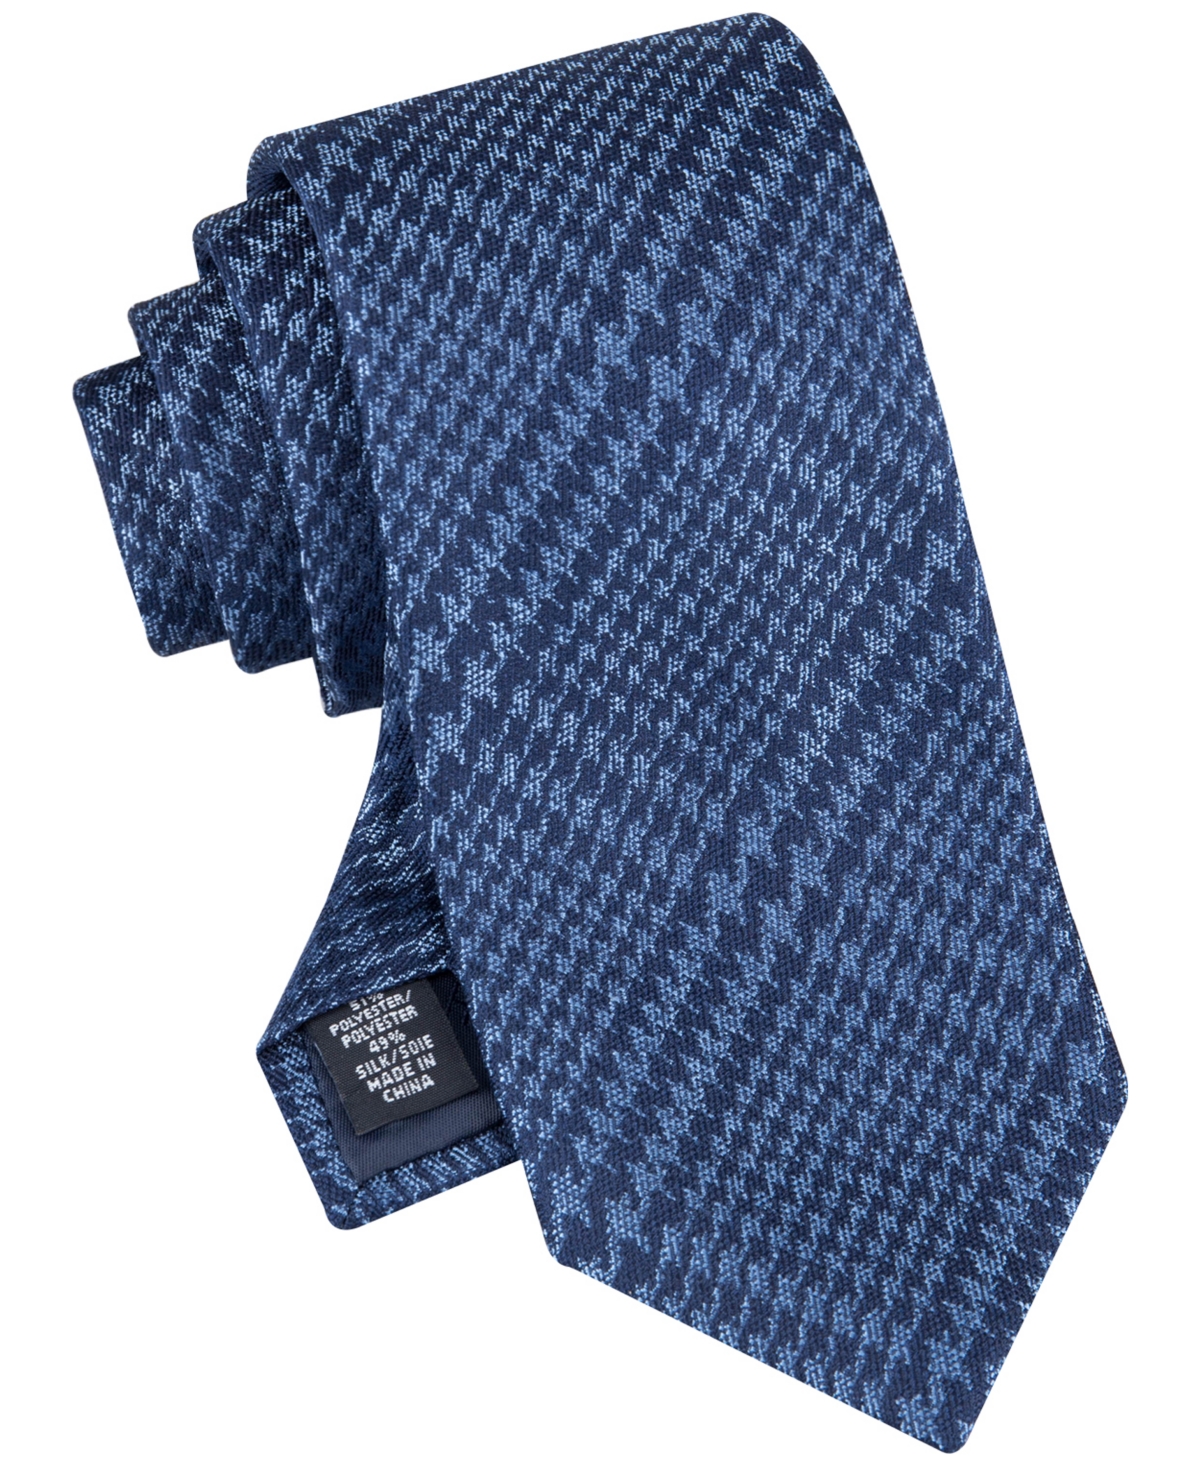 Tommy Hilfiger Men's Large Houndstooth Plaid Tie In Navy,blue